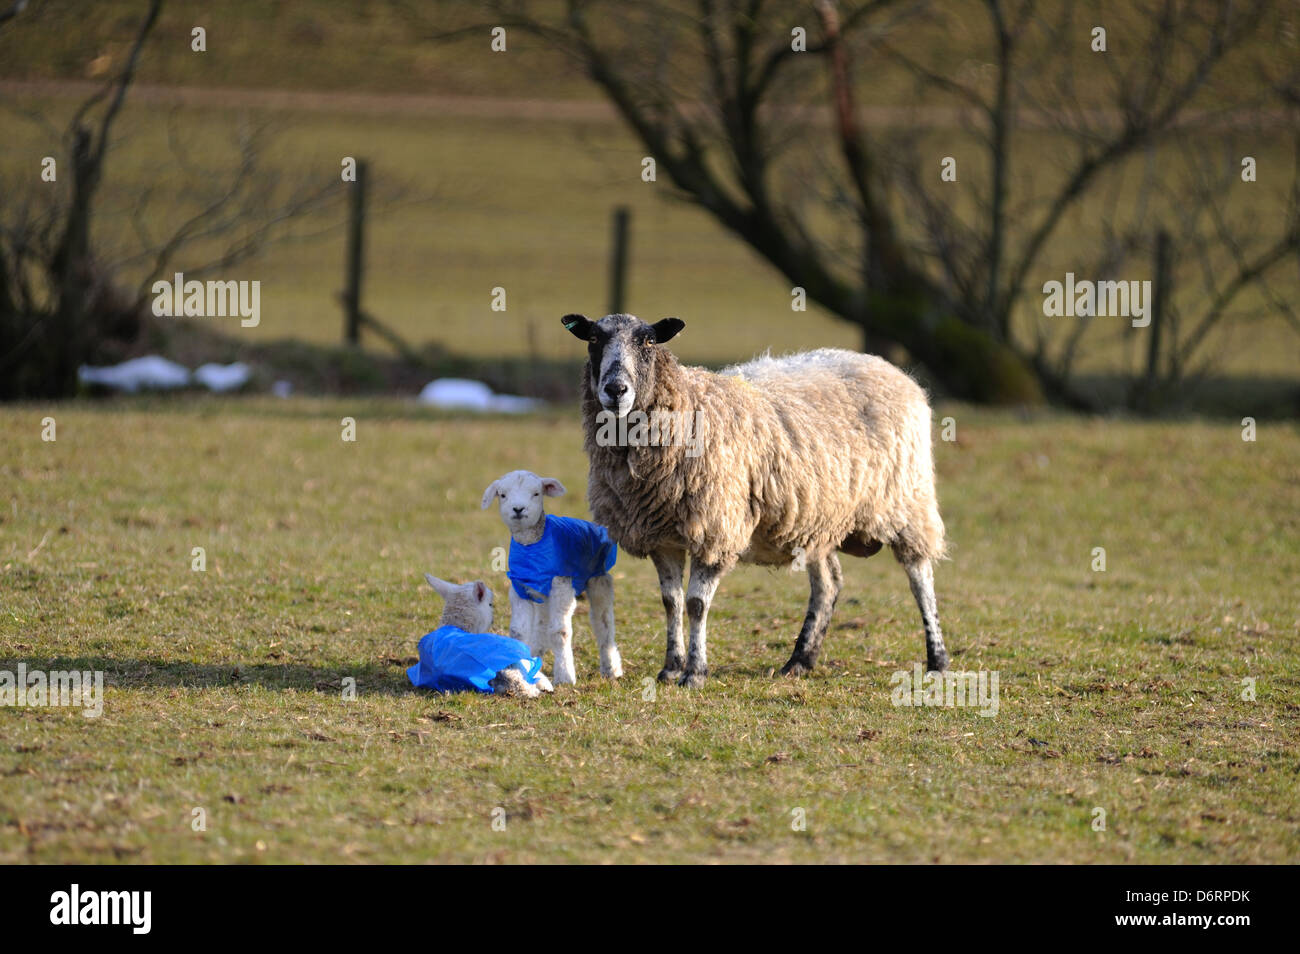 Ewe with lambs wearing protective jackets to keep them warm in the extreme cold weather Stock Photo